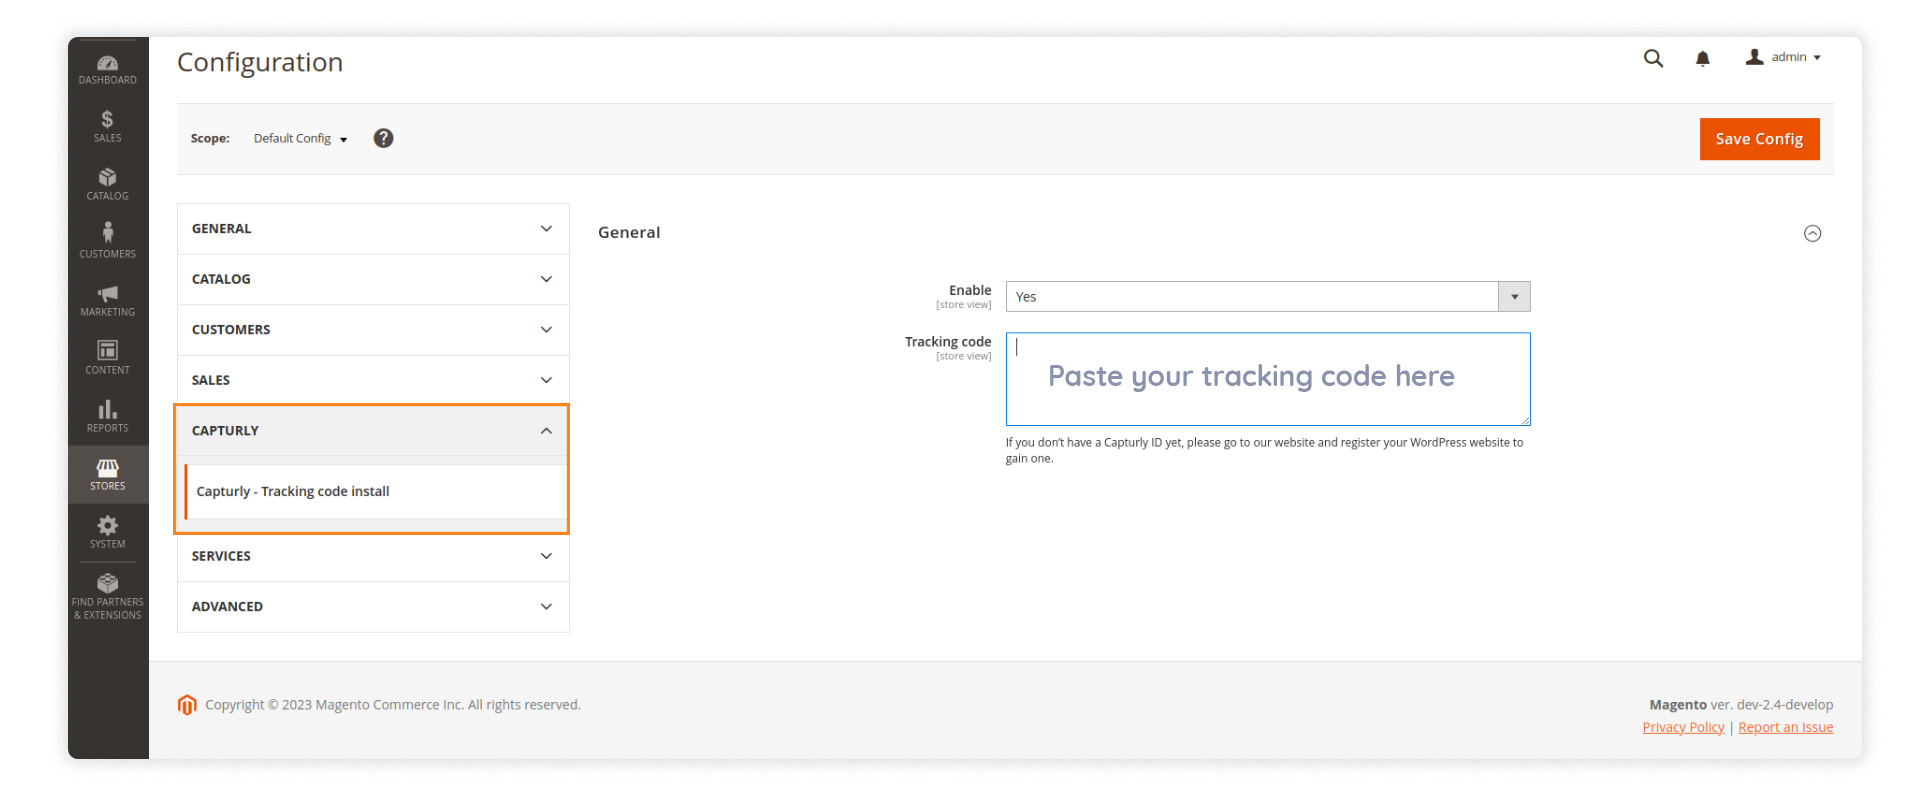 Implementing Capturly's tracking code into a Magento-based store